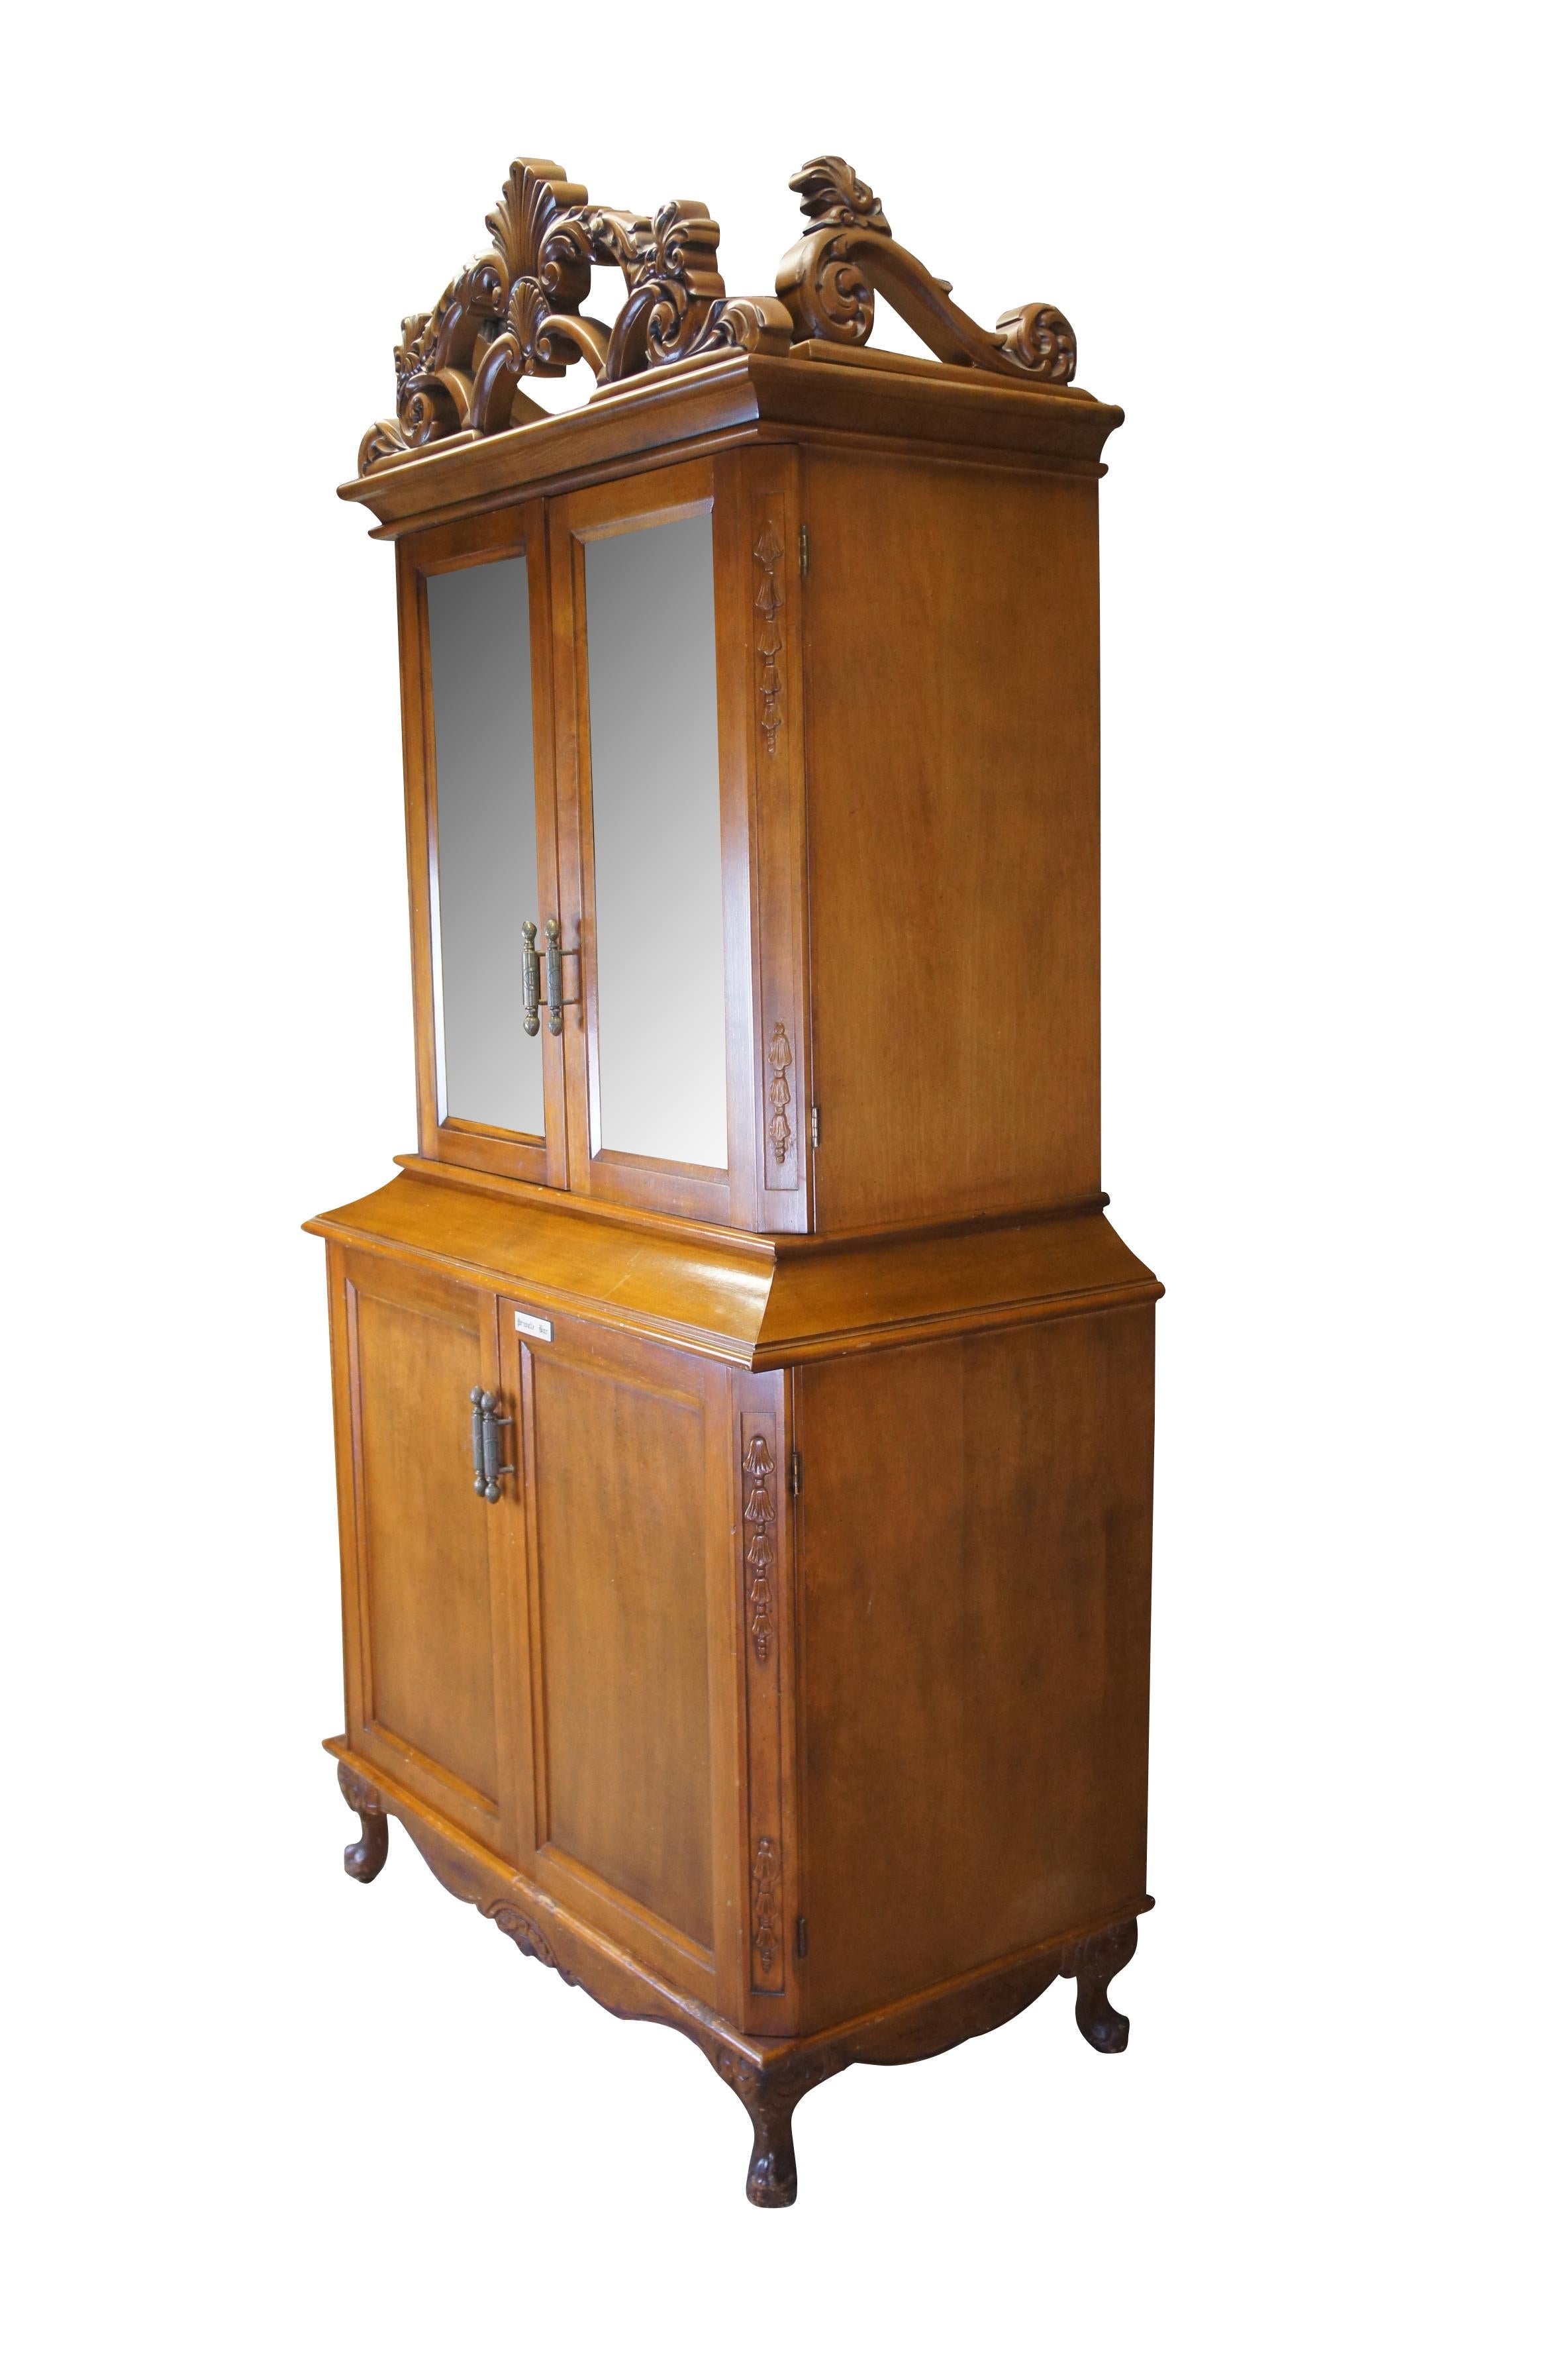 An impressive dry bar / tv cabinet reclaimed from The Plaza Hotel of NYC in the 1990s. Drawing inspiration from French and Italian styling. A tall case made from mahogany with mirrored beveled hutch doors. This stately piece would have been used